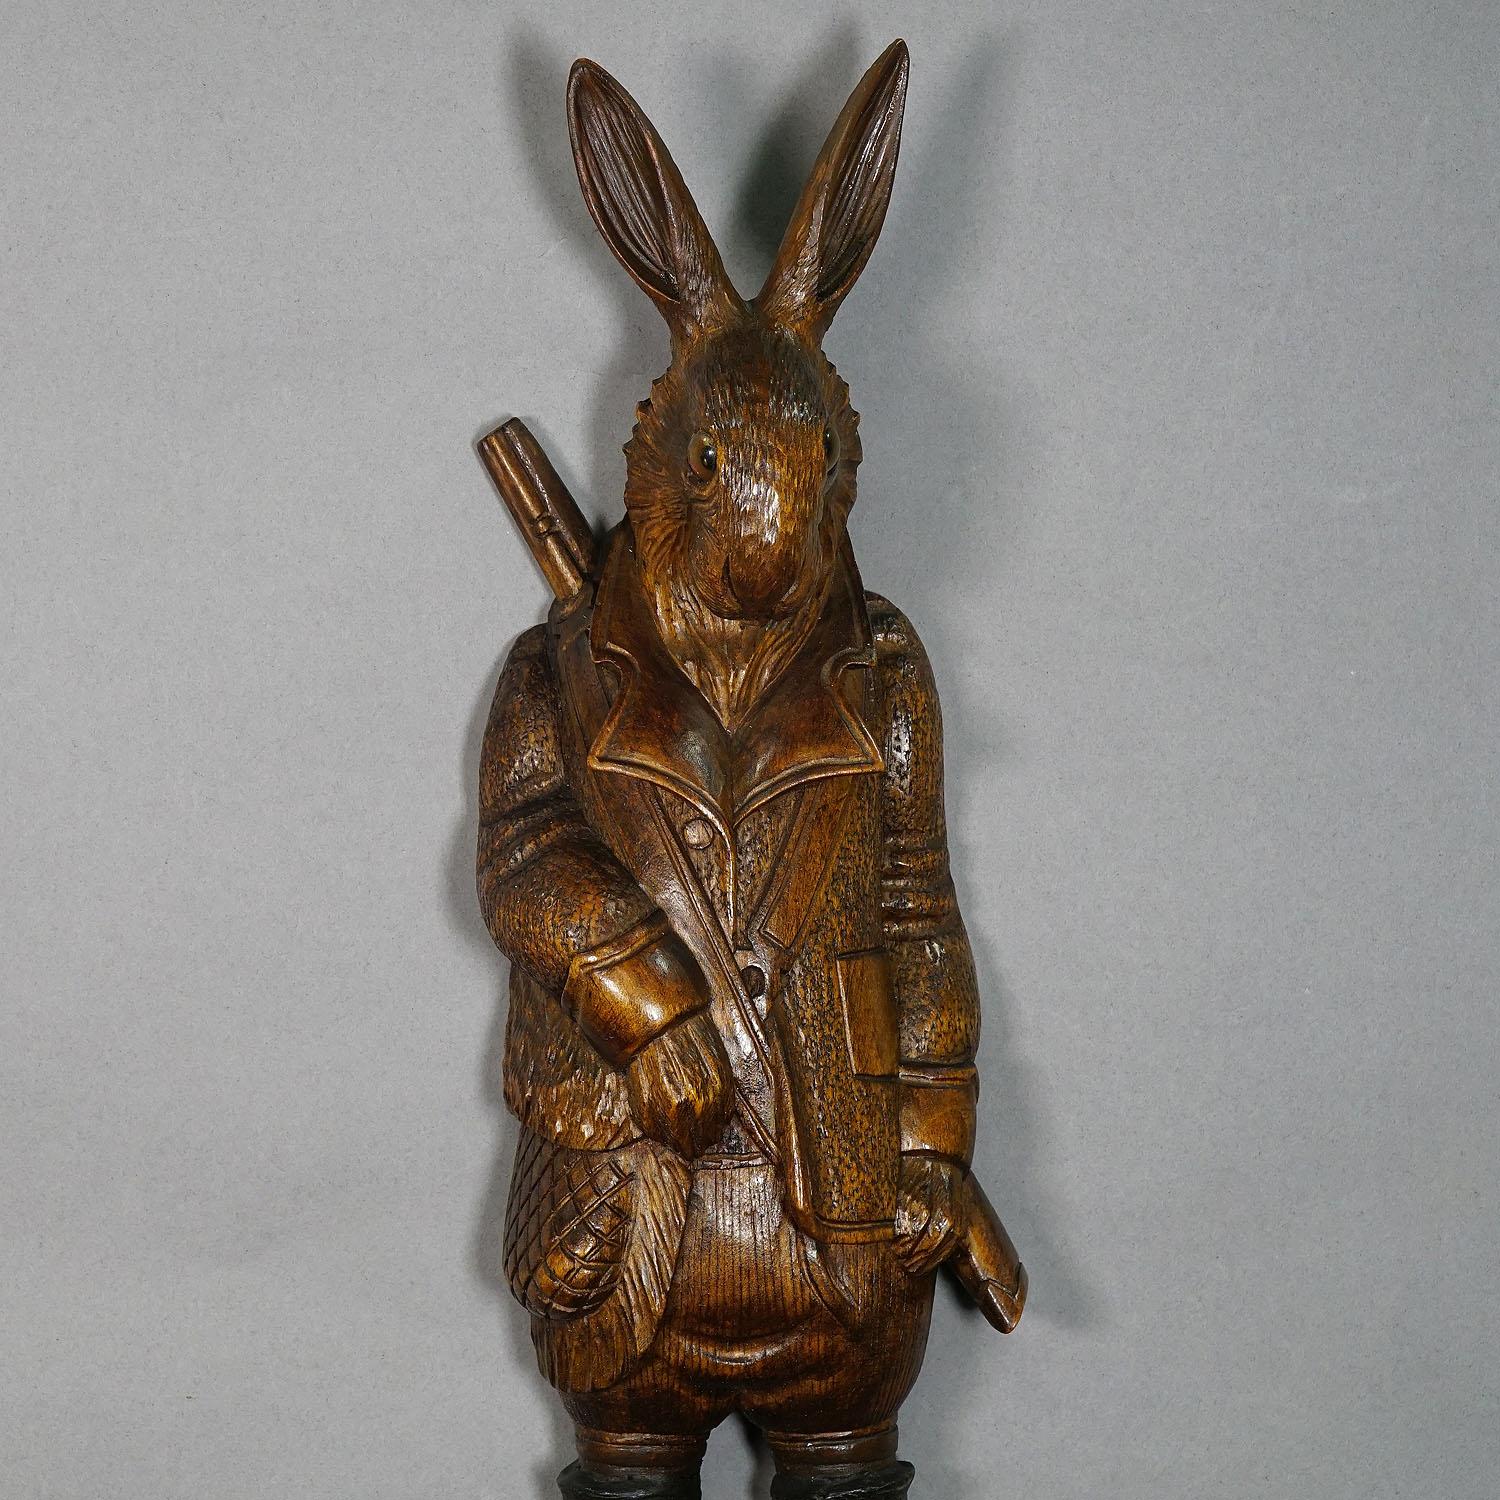 A nice hand carved hunting hare whip holder or coat rack. With genuine chamois horns as hooks. Hand carved in brienz, swizerland circa 1930.

Measures: Width 5.12